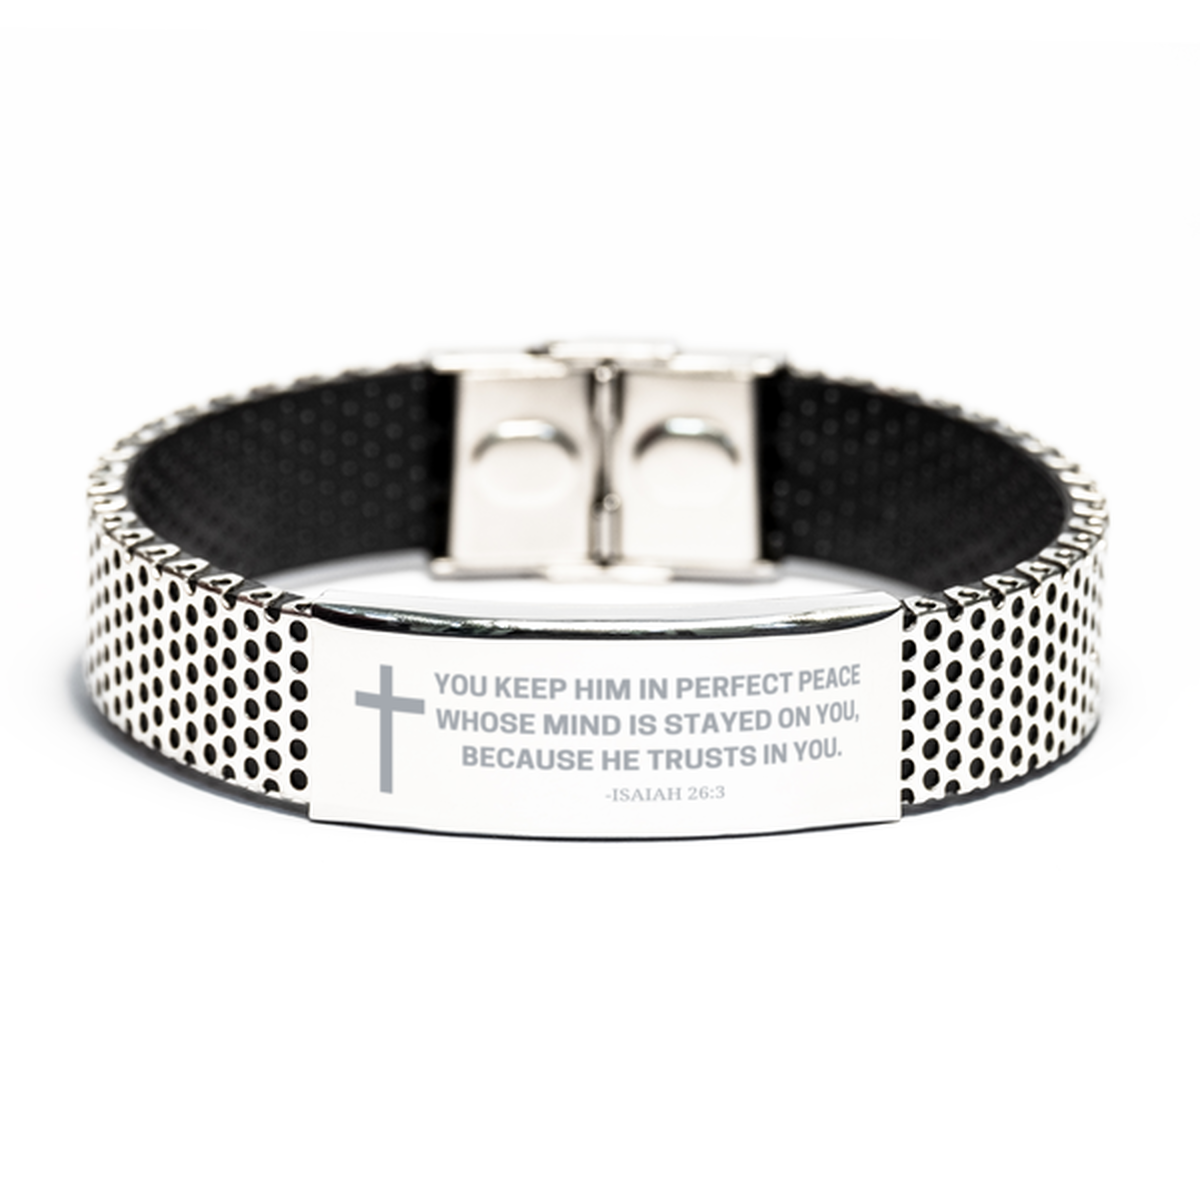 Baptism Gifts For Teenage Boys Girls, Christian Bible Verse Stainless Steel Bracelet, You keep him in perfect peace, Catholic Confirmation Gifts for Son, Godson, Grandson, Nephew